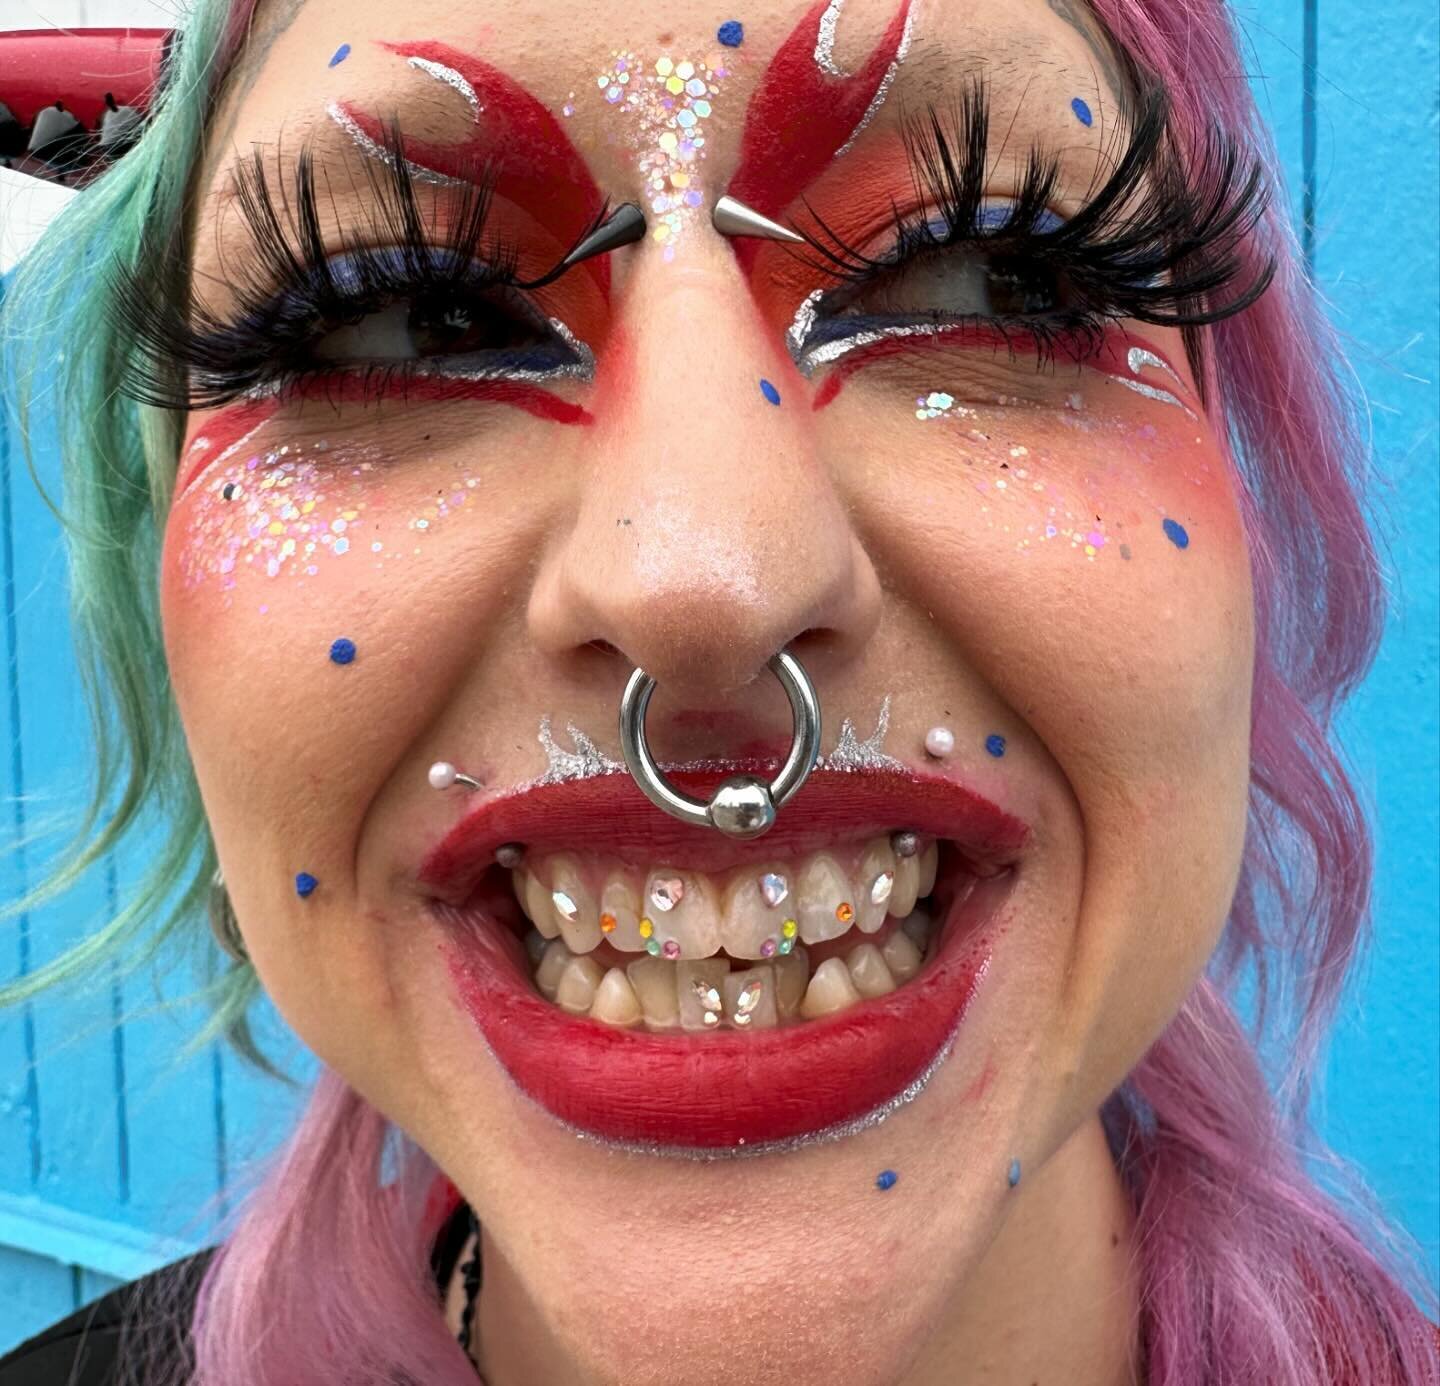 We love a full smile freestyle ❤️ we went for a colorful vibe with heart and a butterfly. Springy &amp; cute 💕🦋 if you&rsquo;re looking for a dazzly smile, hit us up- link in bio thanks @nsfwhair 😘 #toothgems #tooth #neworleans #toothgemsneworlean